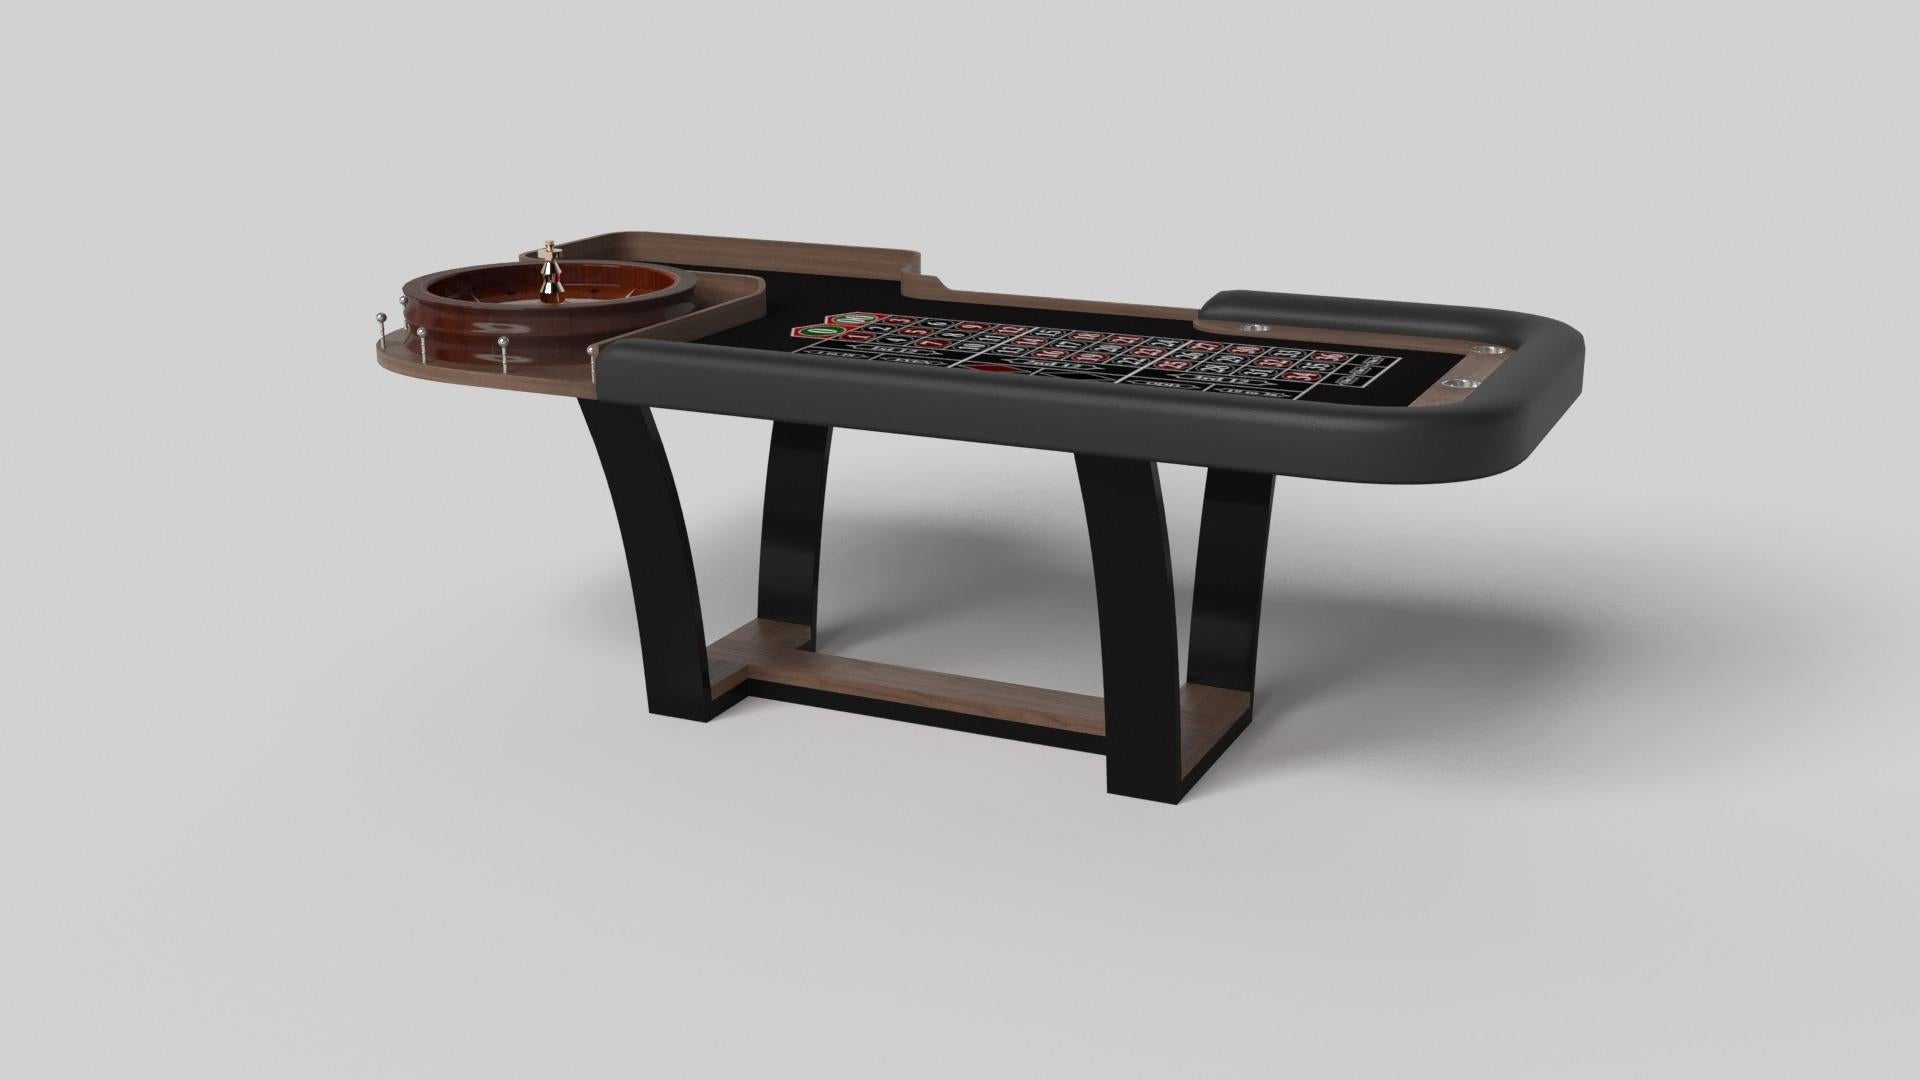 With an I-shaped metal base, slightly sloped metal legs, and a contrasting wood top, the Elite roulette table exudes modern sophistication while evoking a sense of art deco design. This table is a confluence of style, made to meet today's demands